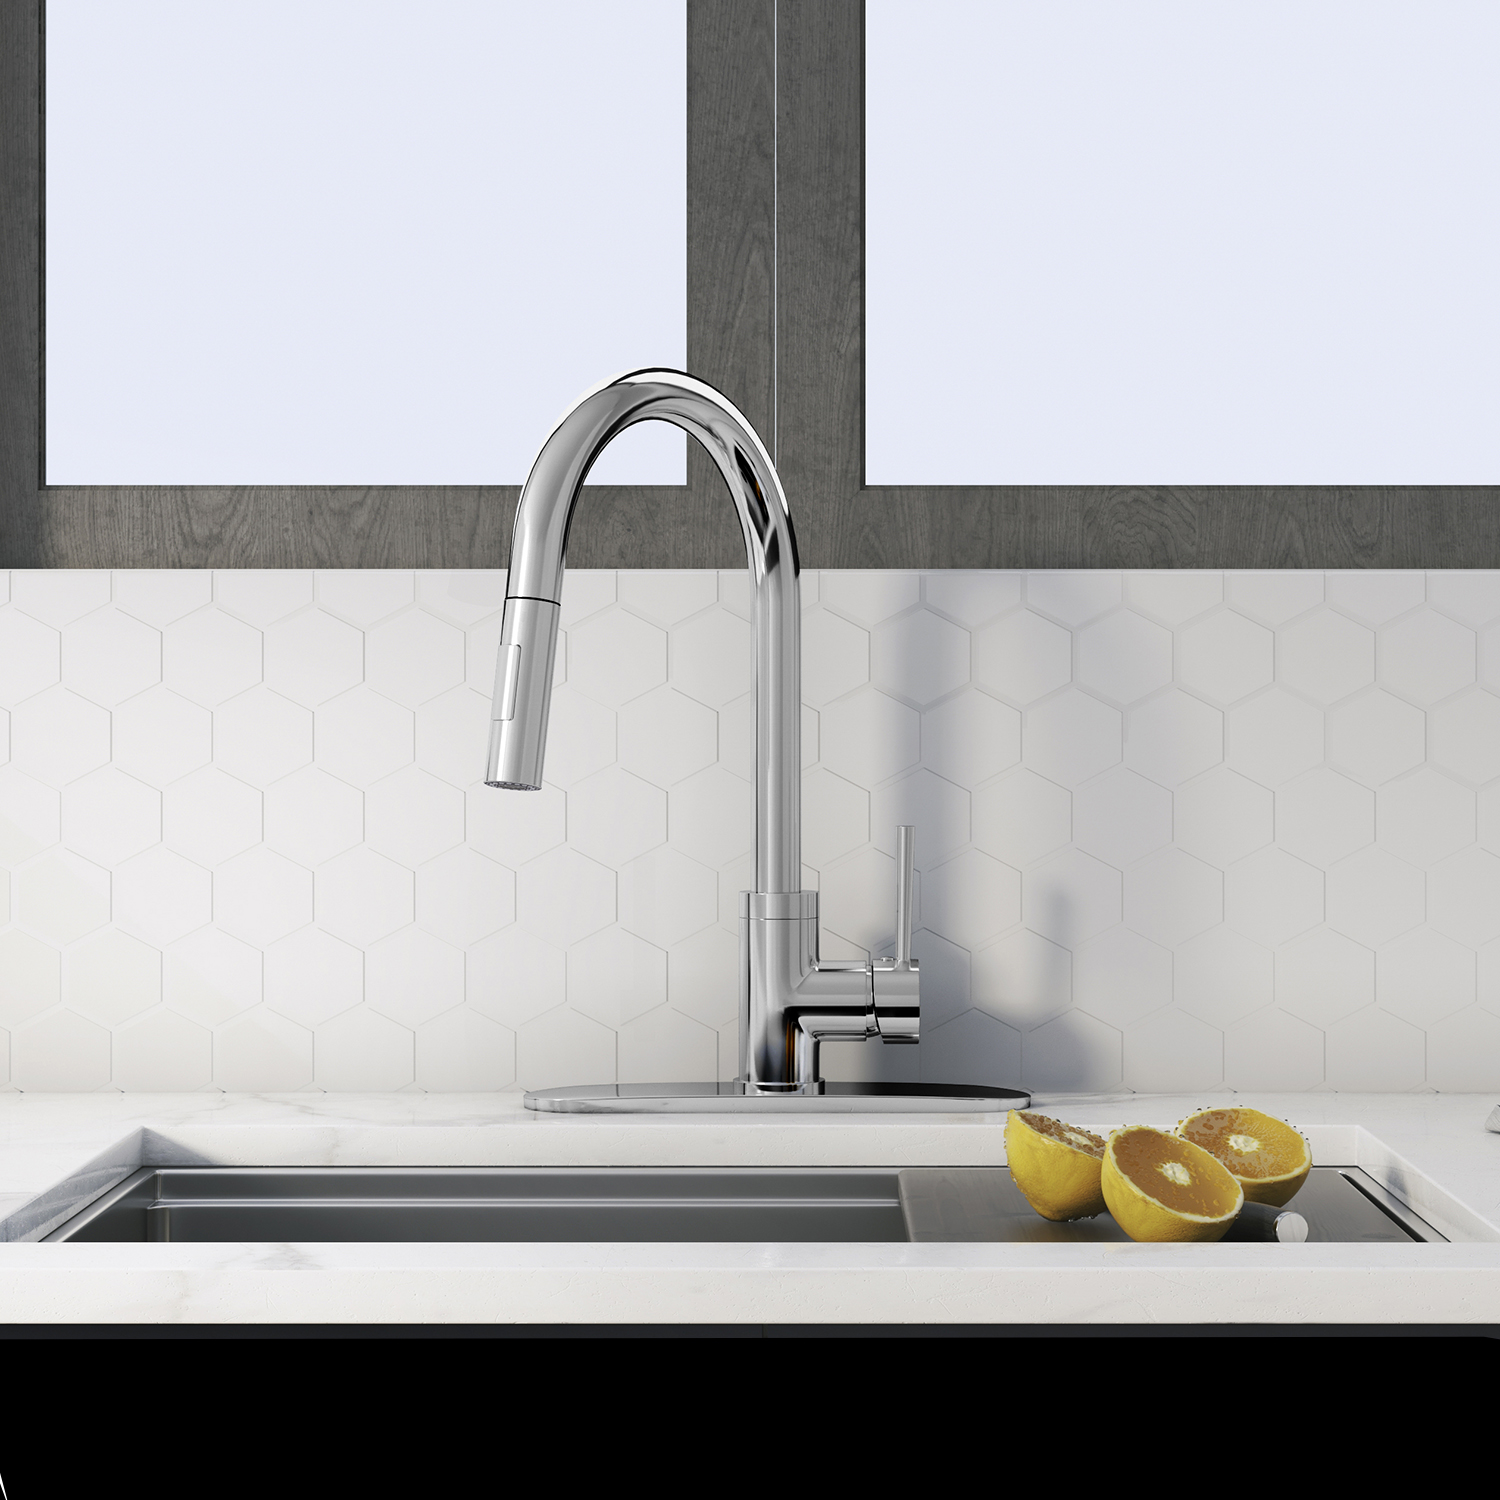 Kitchen Taps Pull Out Pull Down Kitchen Mixer Sink Chrome upc Faucet Modern Sink Kitchen Faucets With Sprayer